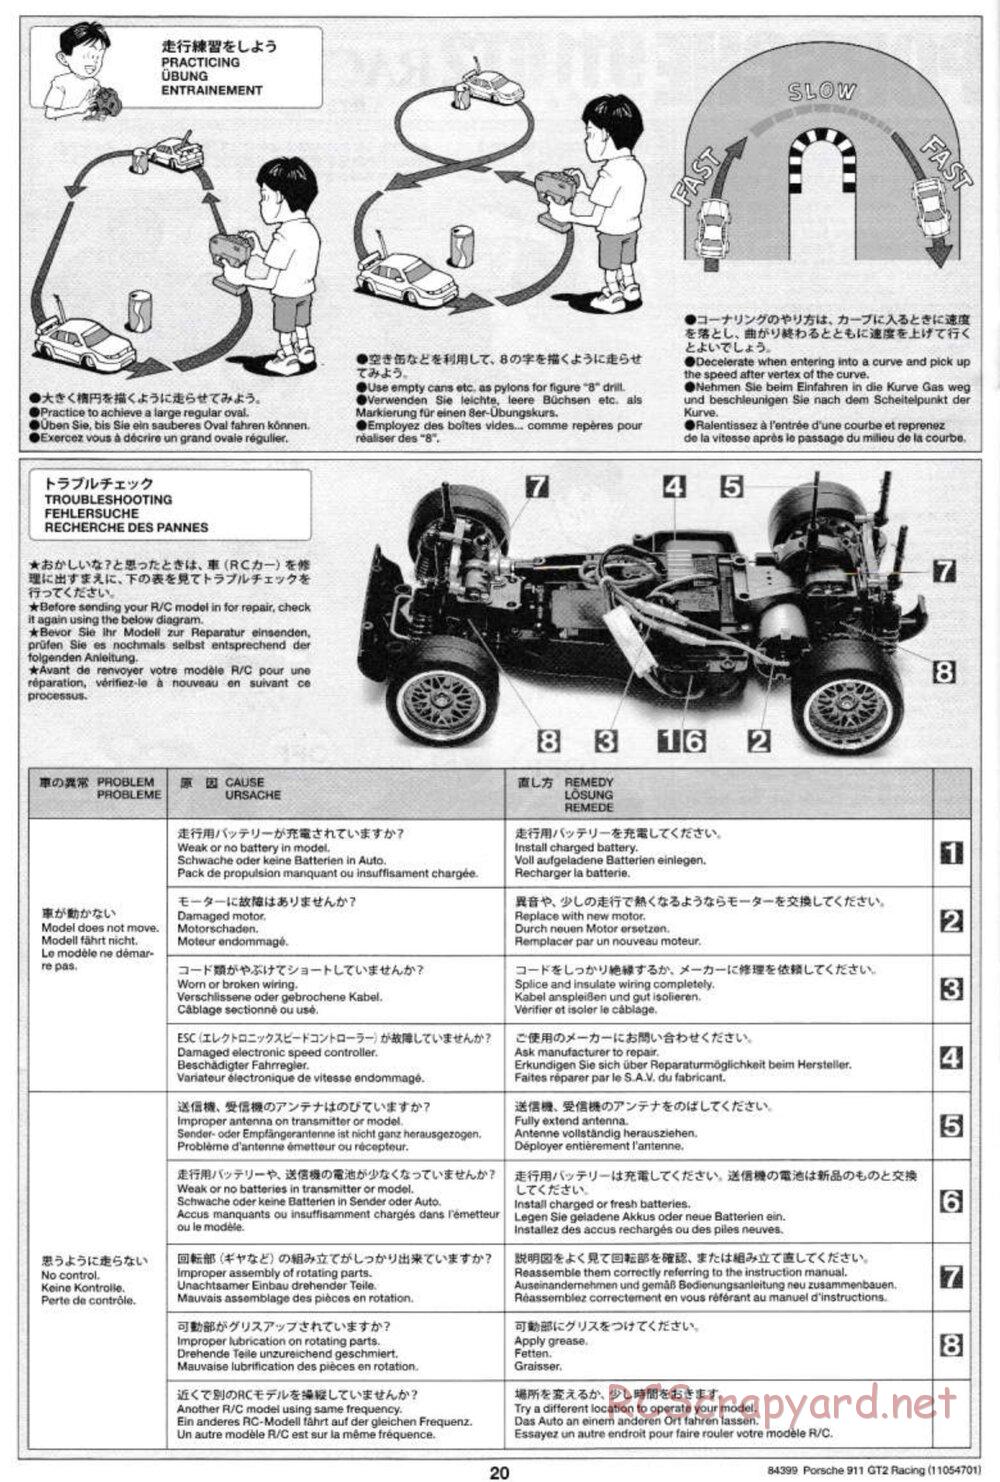 Tamiya - Porsche 911 GT2 Racing - TA-02SW Chassis - Manual - Page 20